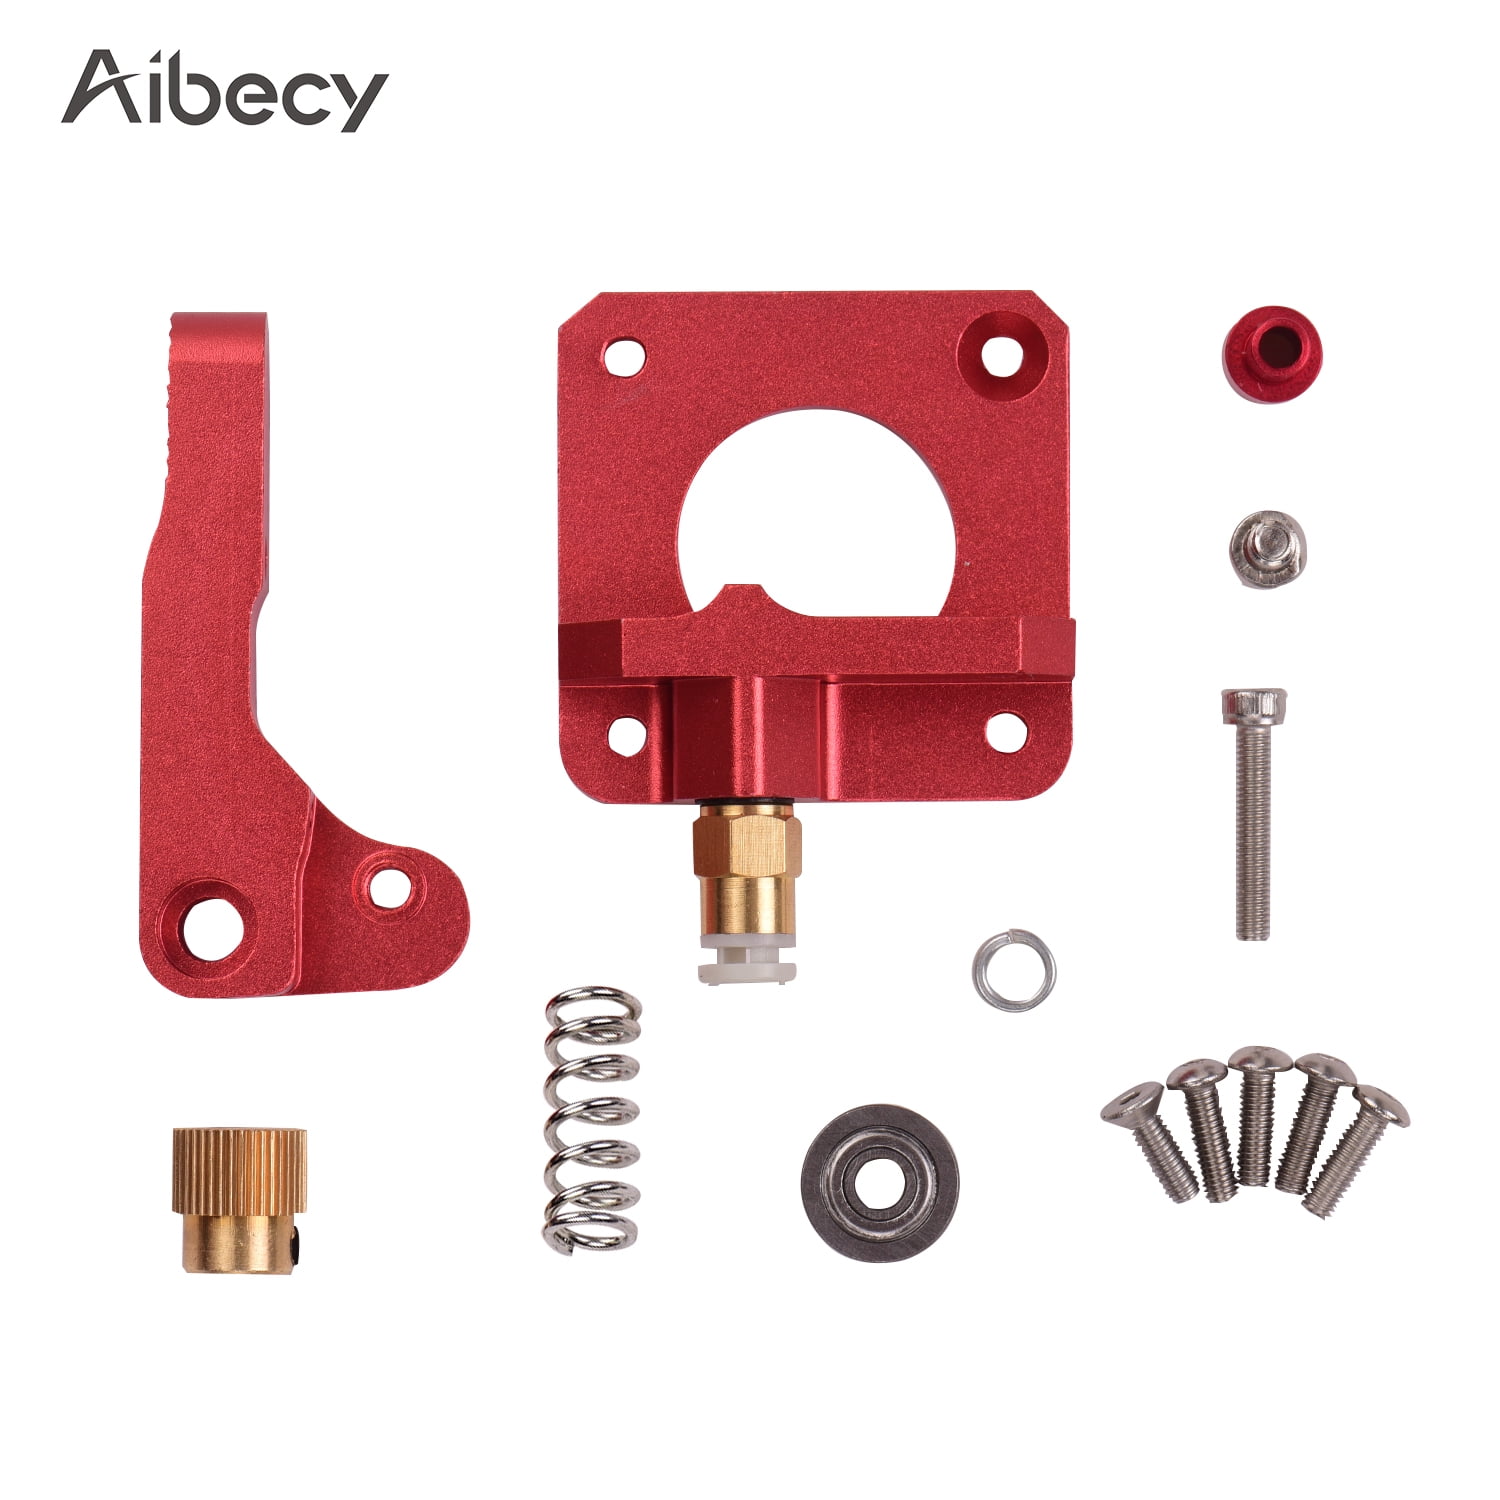 Aluminum Frame MK8 Extruder Drive Feed For Creality CR-10/10S Series 3D Printer 